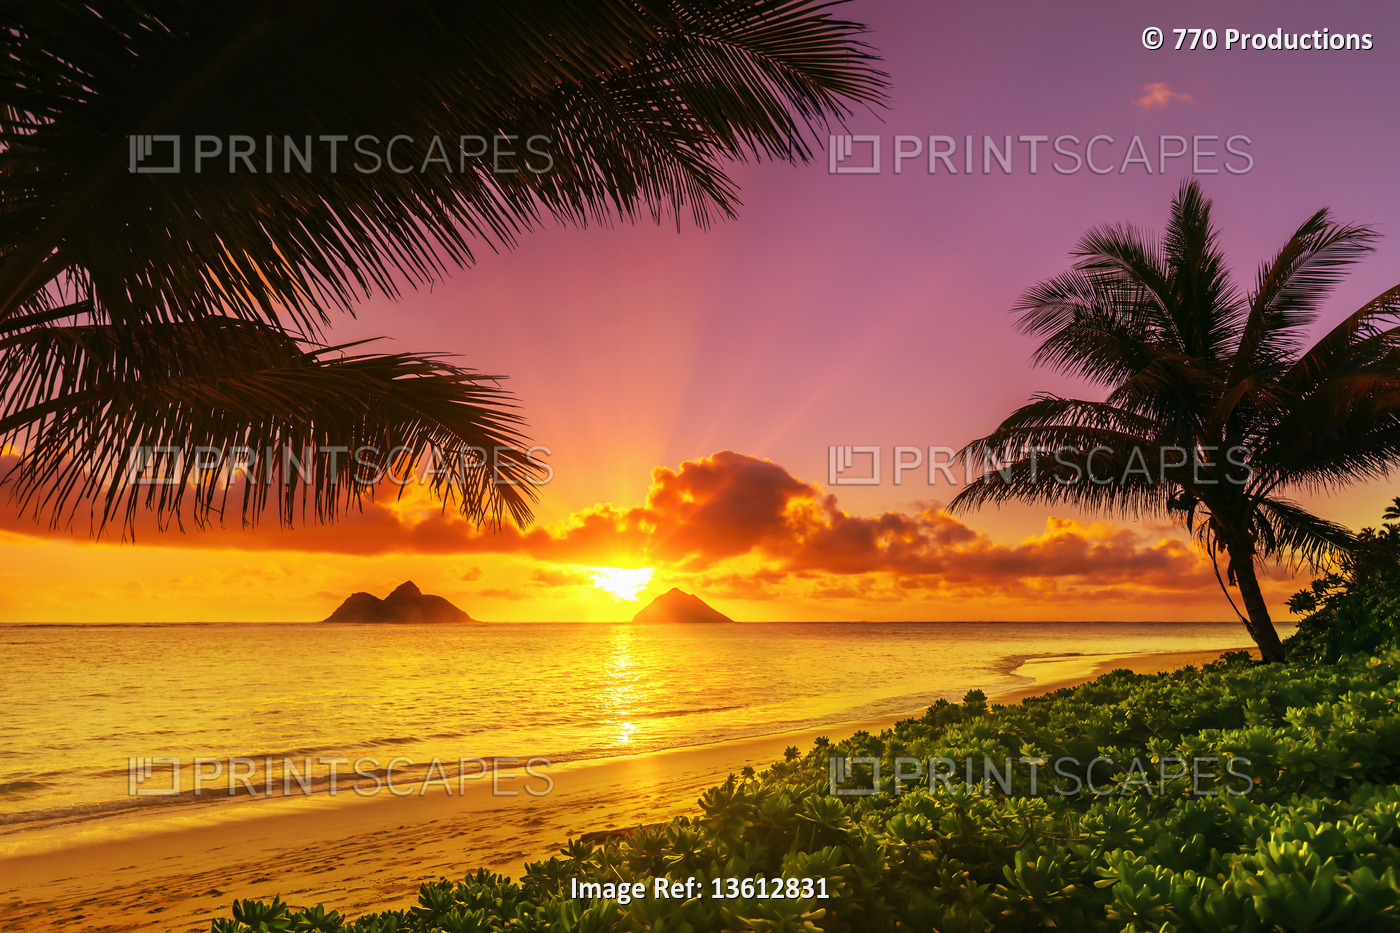 Lanakai Beach at sunrise, with the surf washing up on the golden sand and a ...